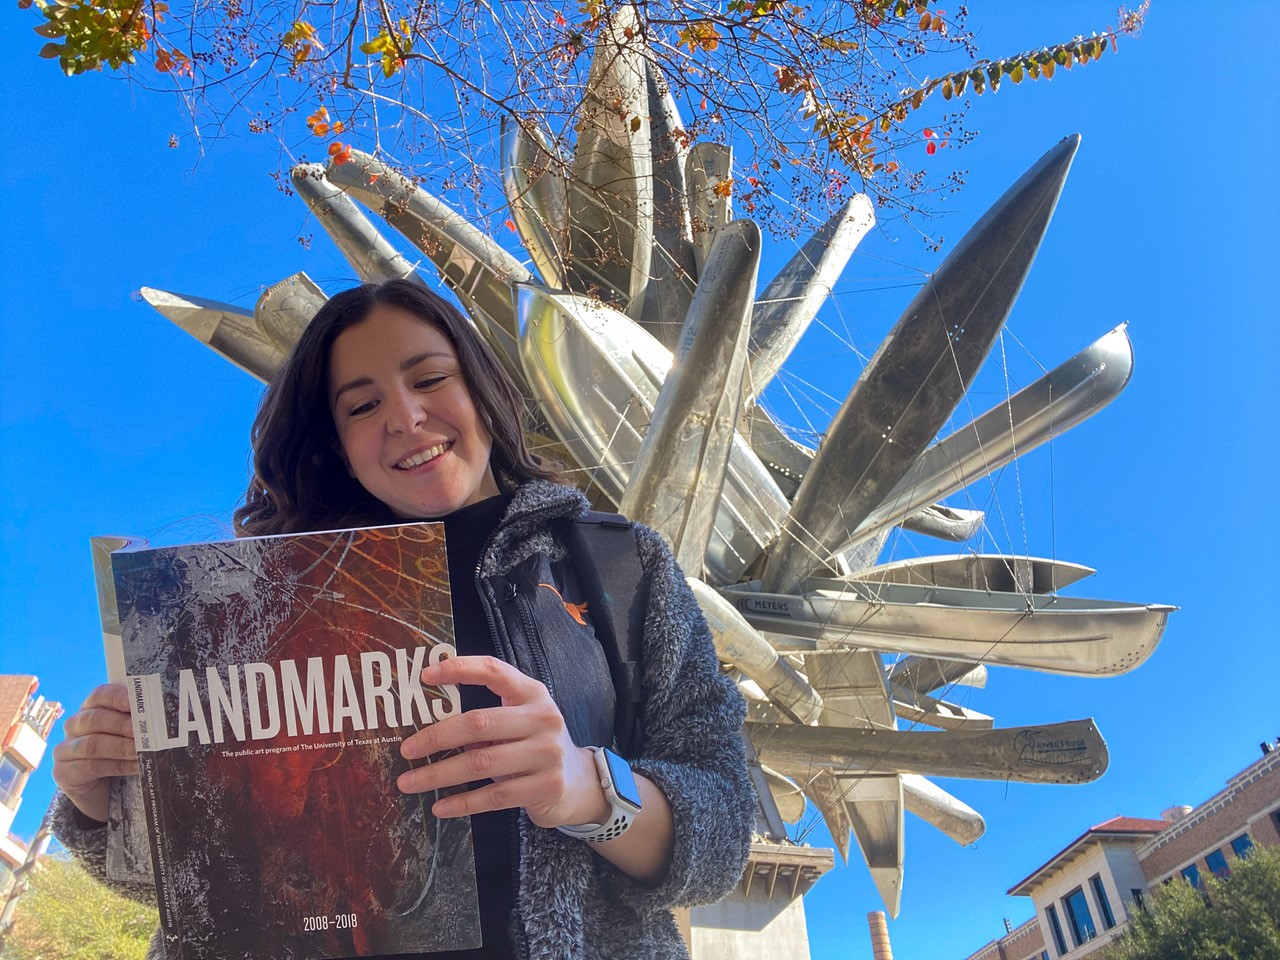 A woman with dark brown hair looks down at a Landmarks Handbook. She wears a UT jacket with a "longhorn" emblem on the front. She stands in front of Nancy Rubins' "Monochrome for Austin" a sculpture made of canoes assembled and suspended in air.